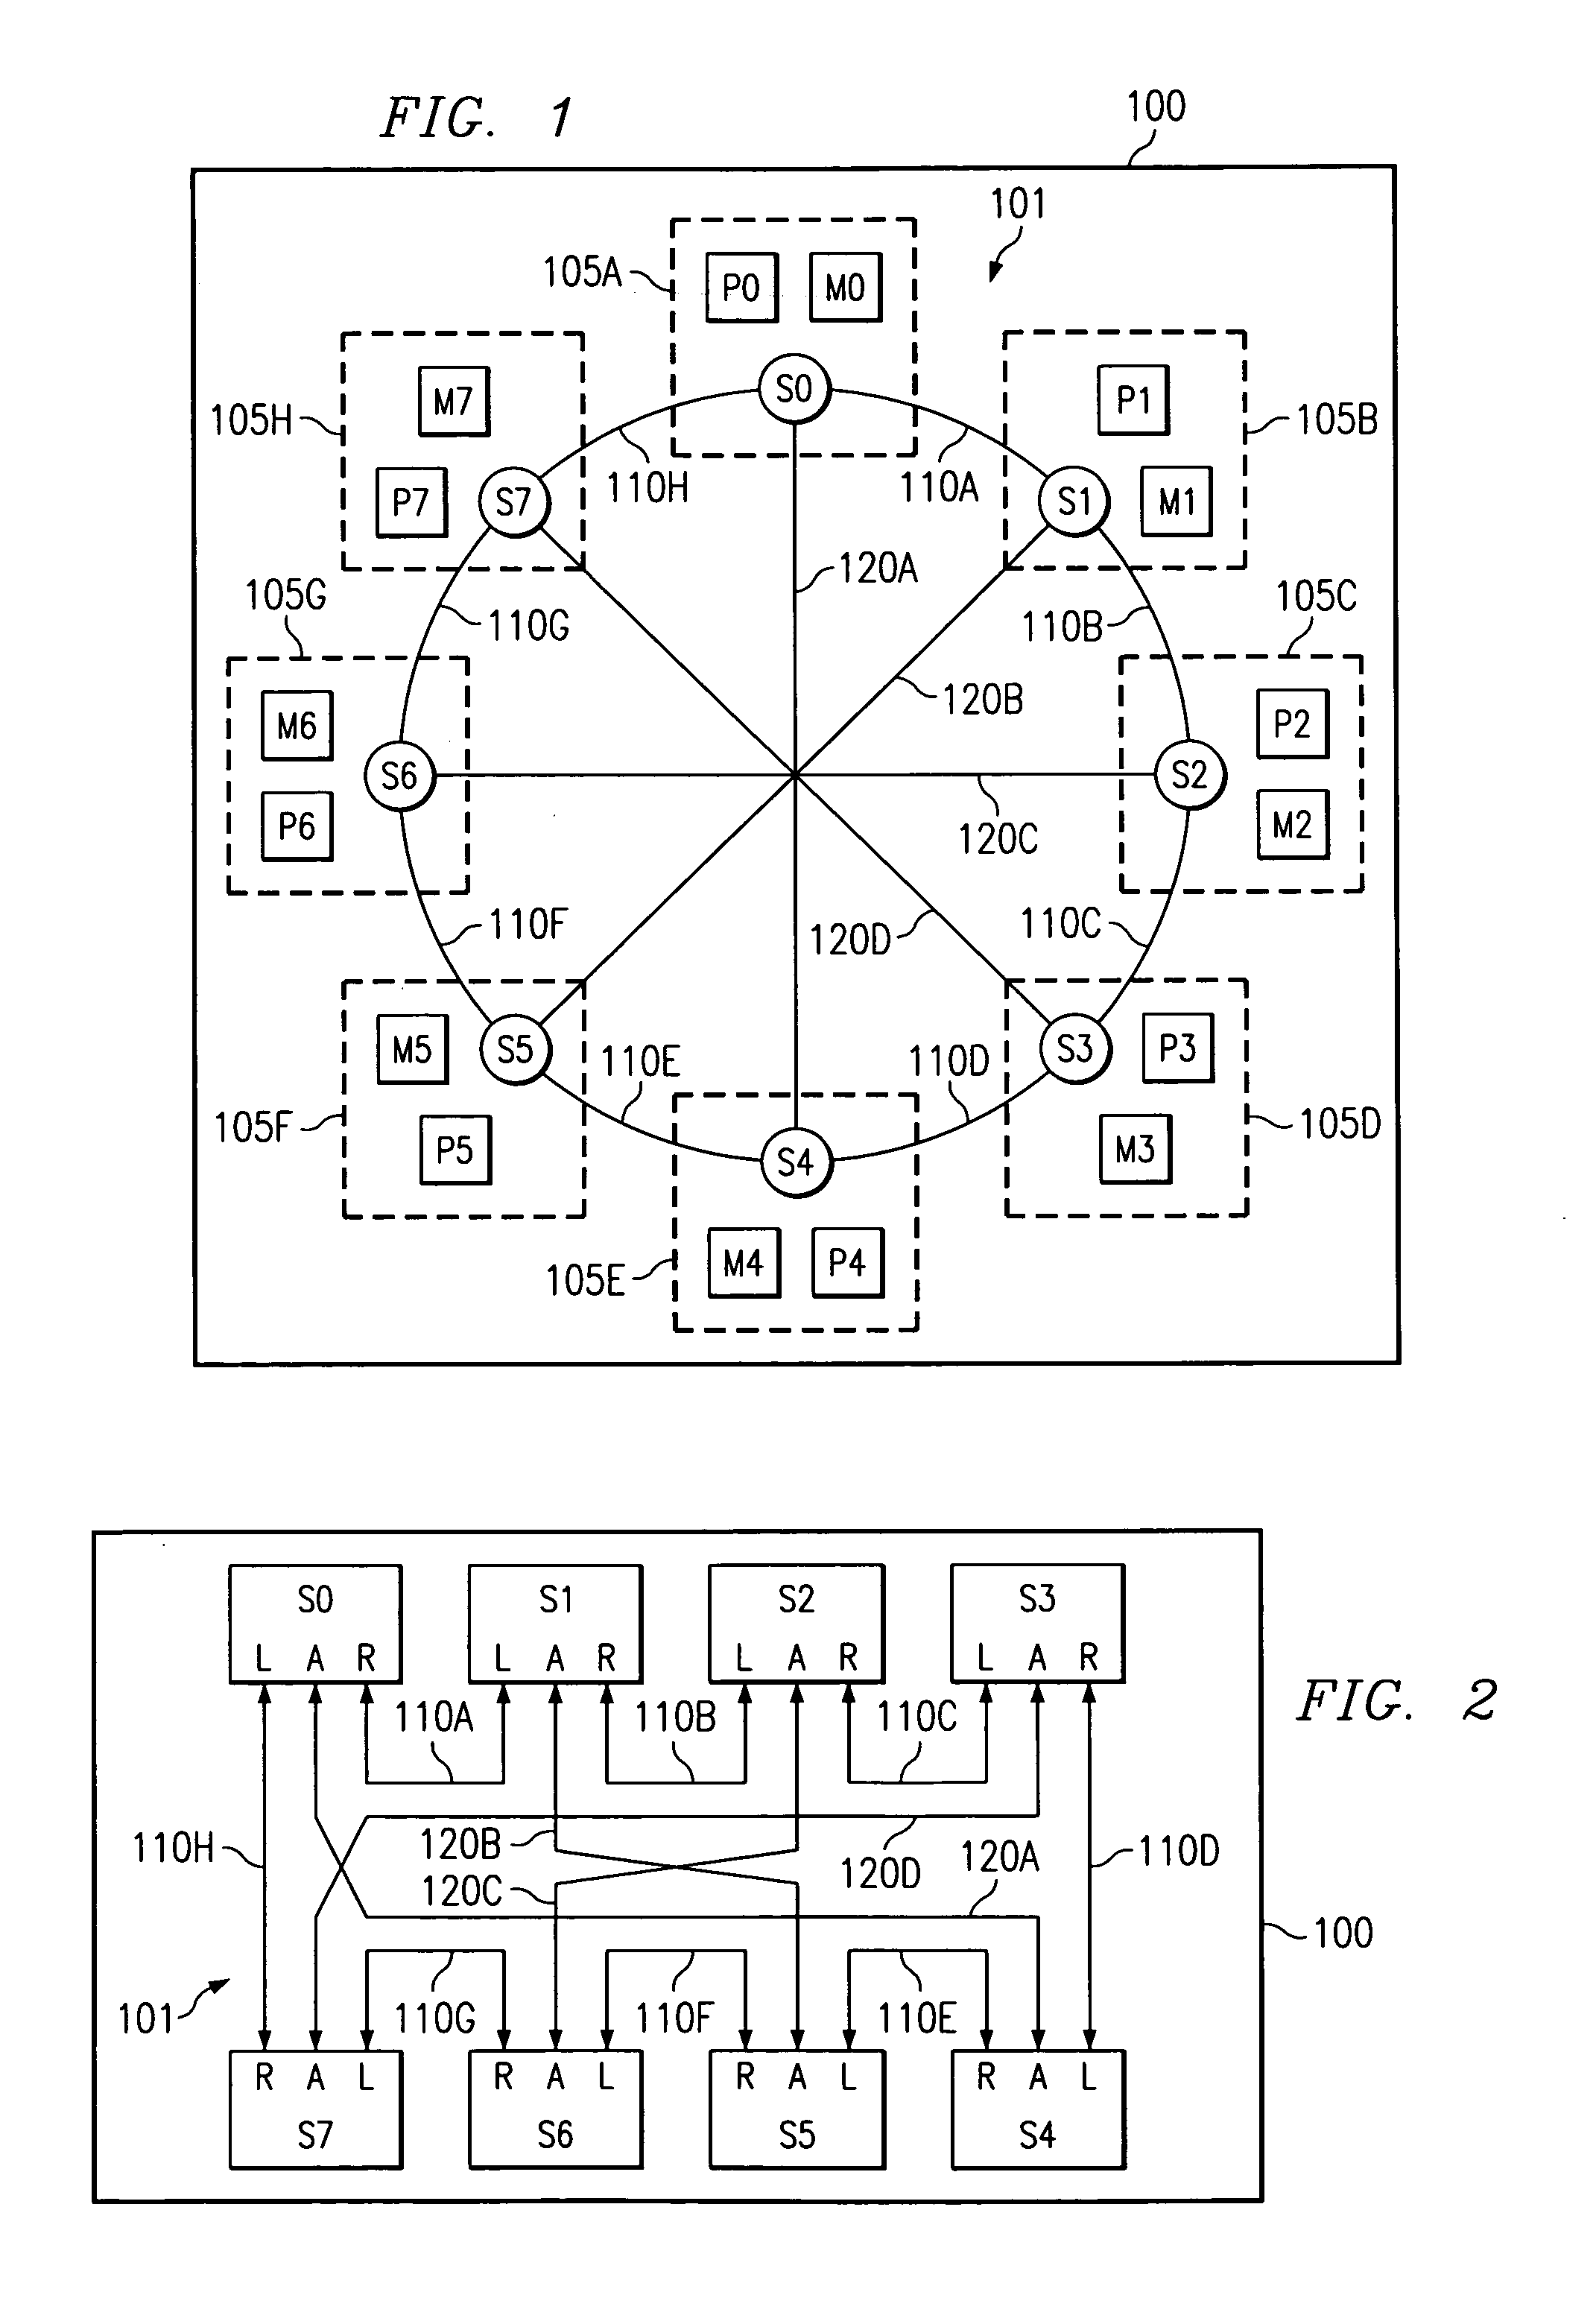 Octagonal interconnection network for linking processing nodes on an SOC device and method of operating same